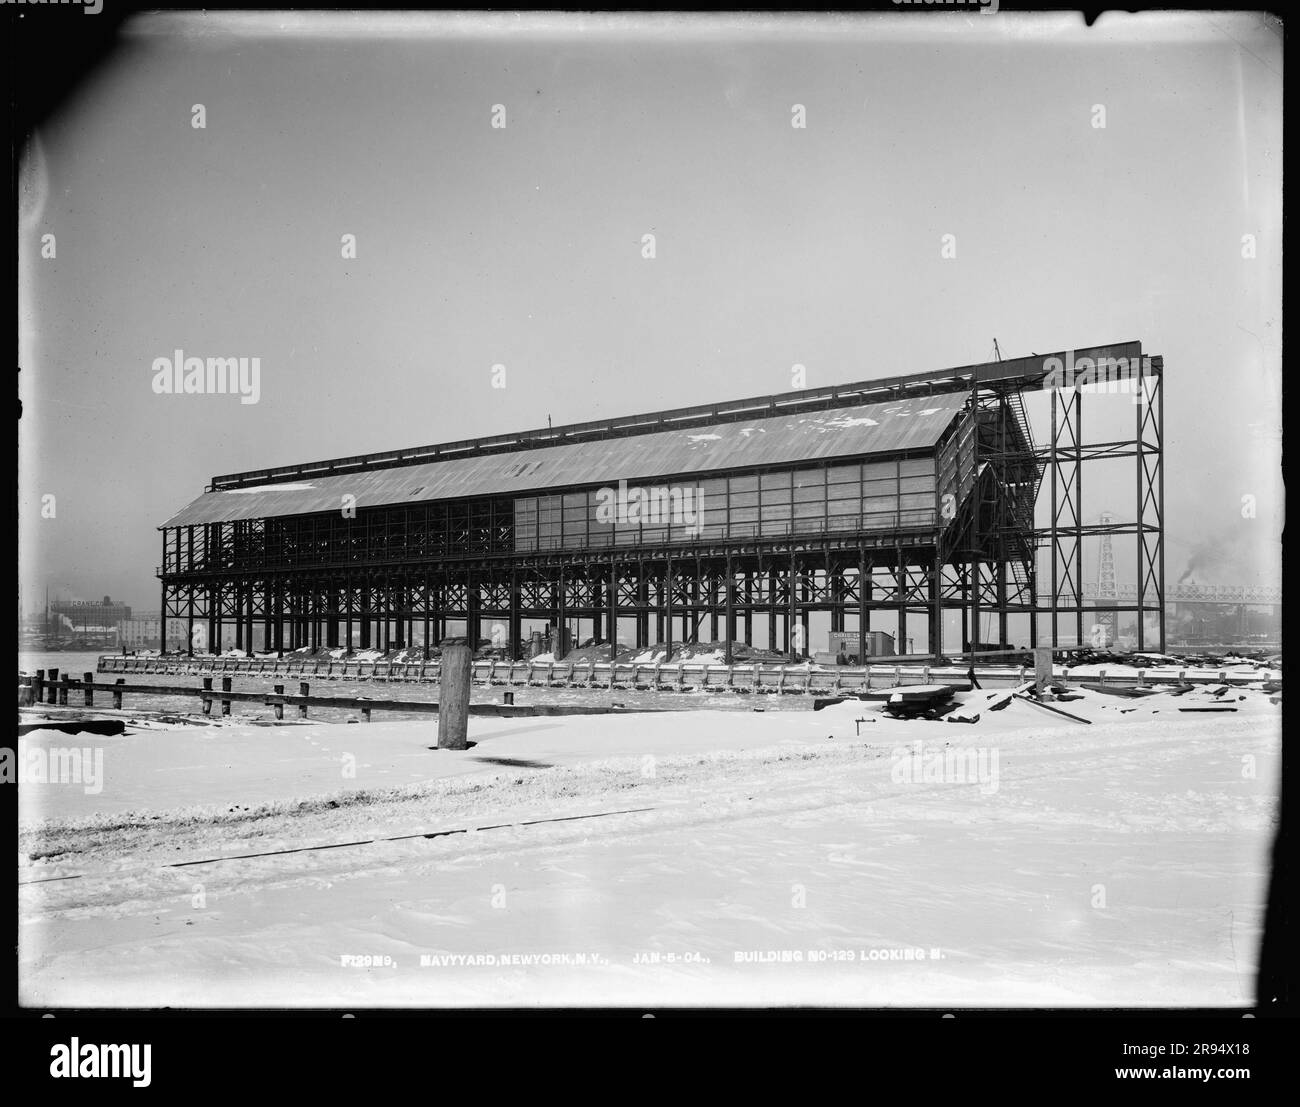 Building Number 129, Looking North. Glass Plate Negatives of the Construction and Repair of Buildings, Facilities, and Vessels at the New York Navy Yard. Stock Photo